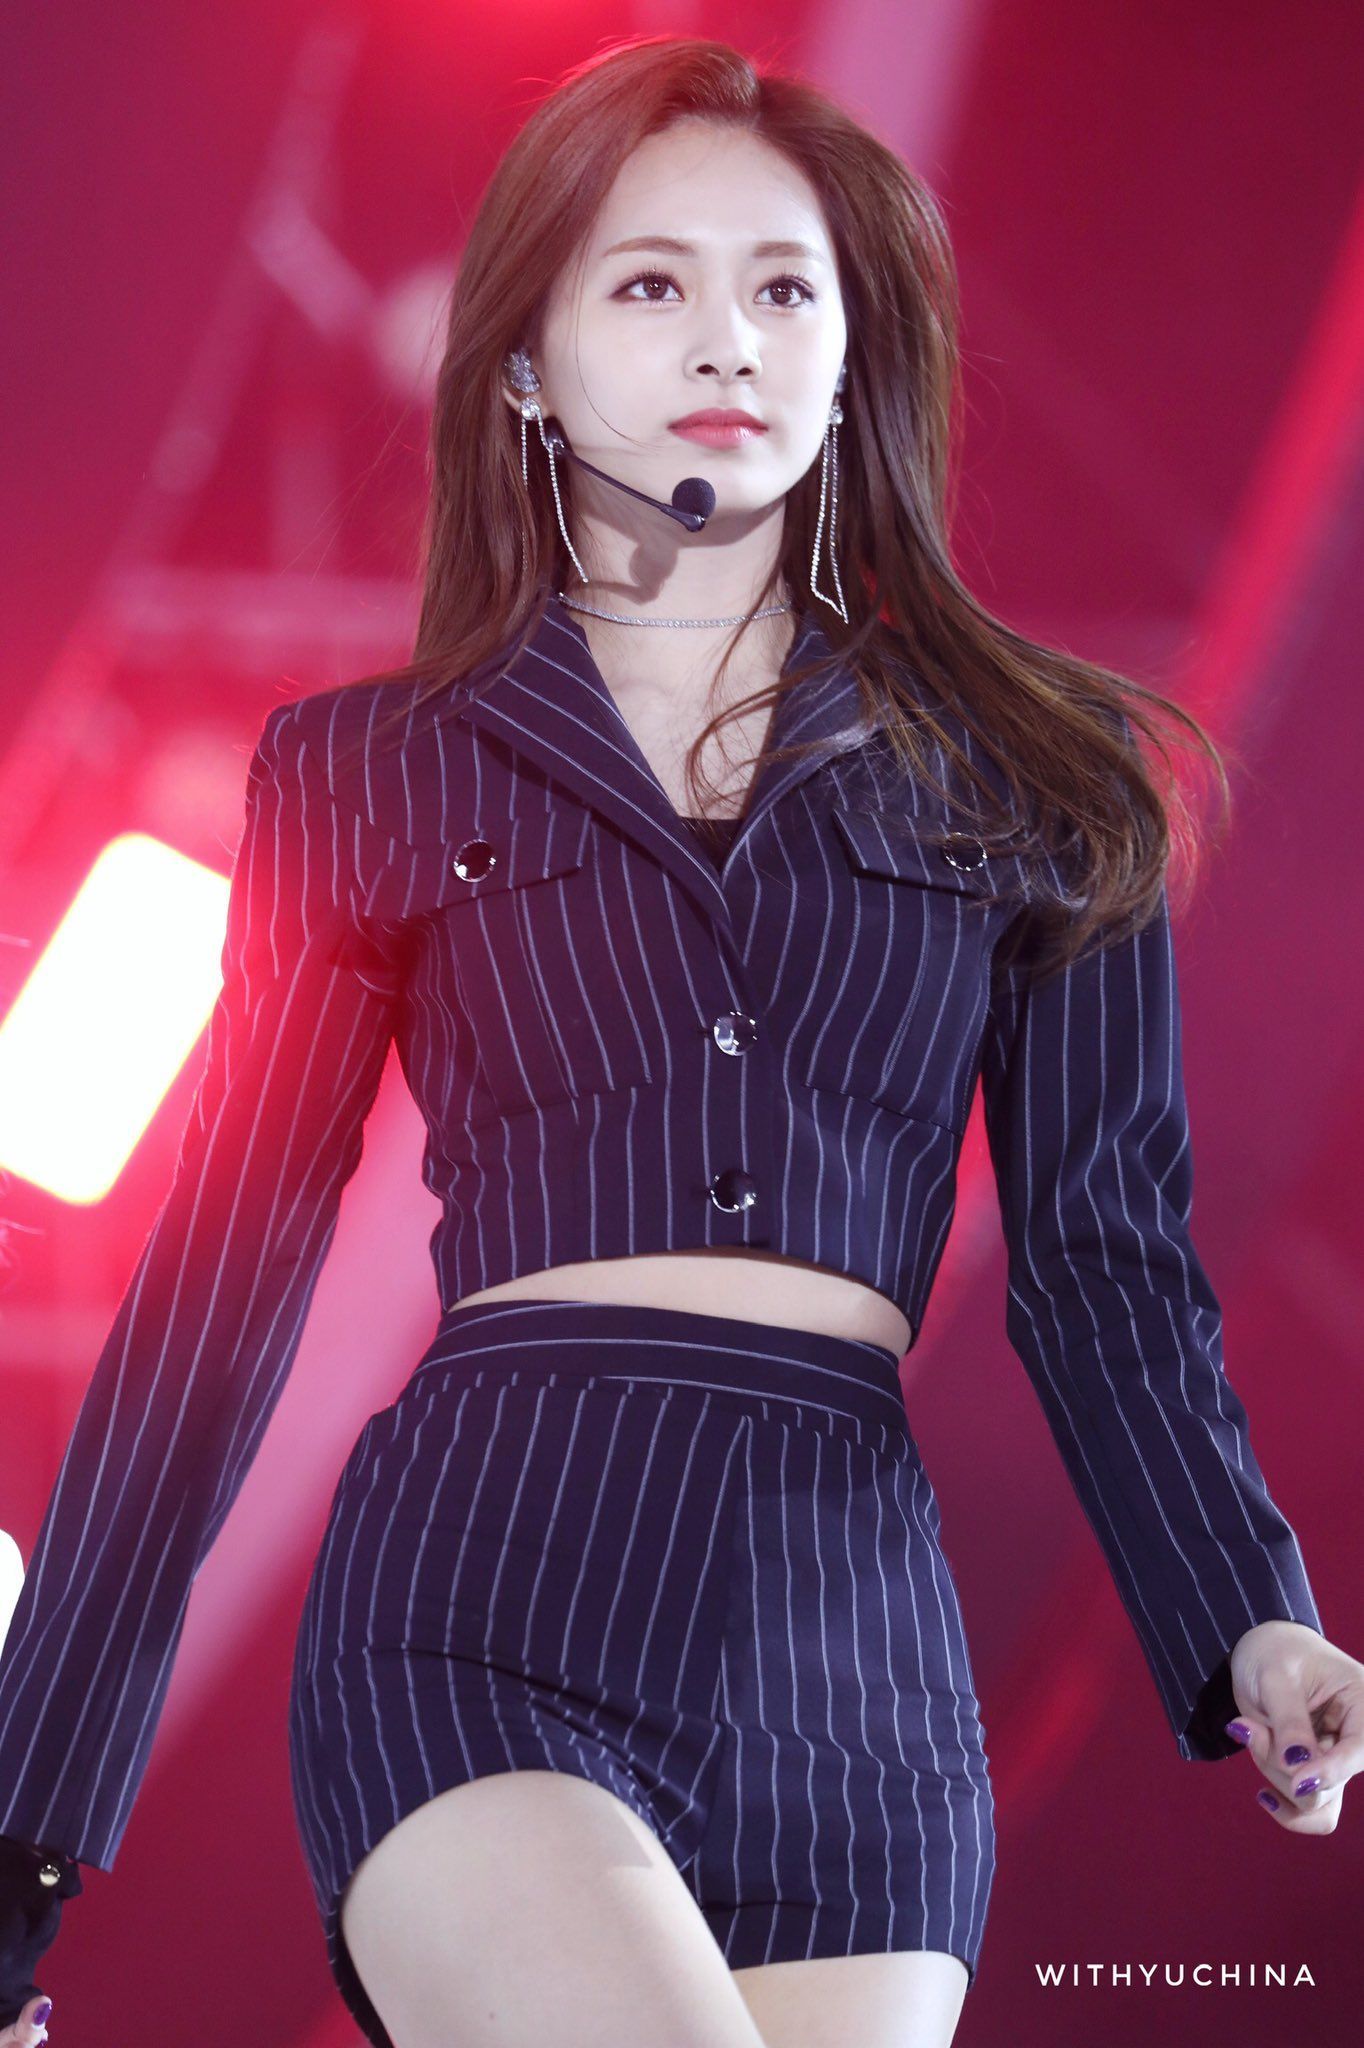 tzuyu pics on Twitter. Stage outfits, Kpop outfits, Kpop fashion